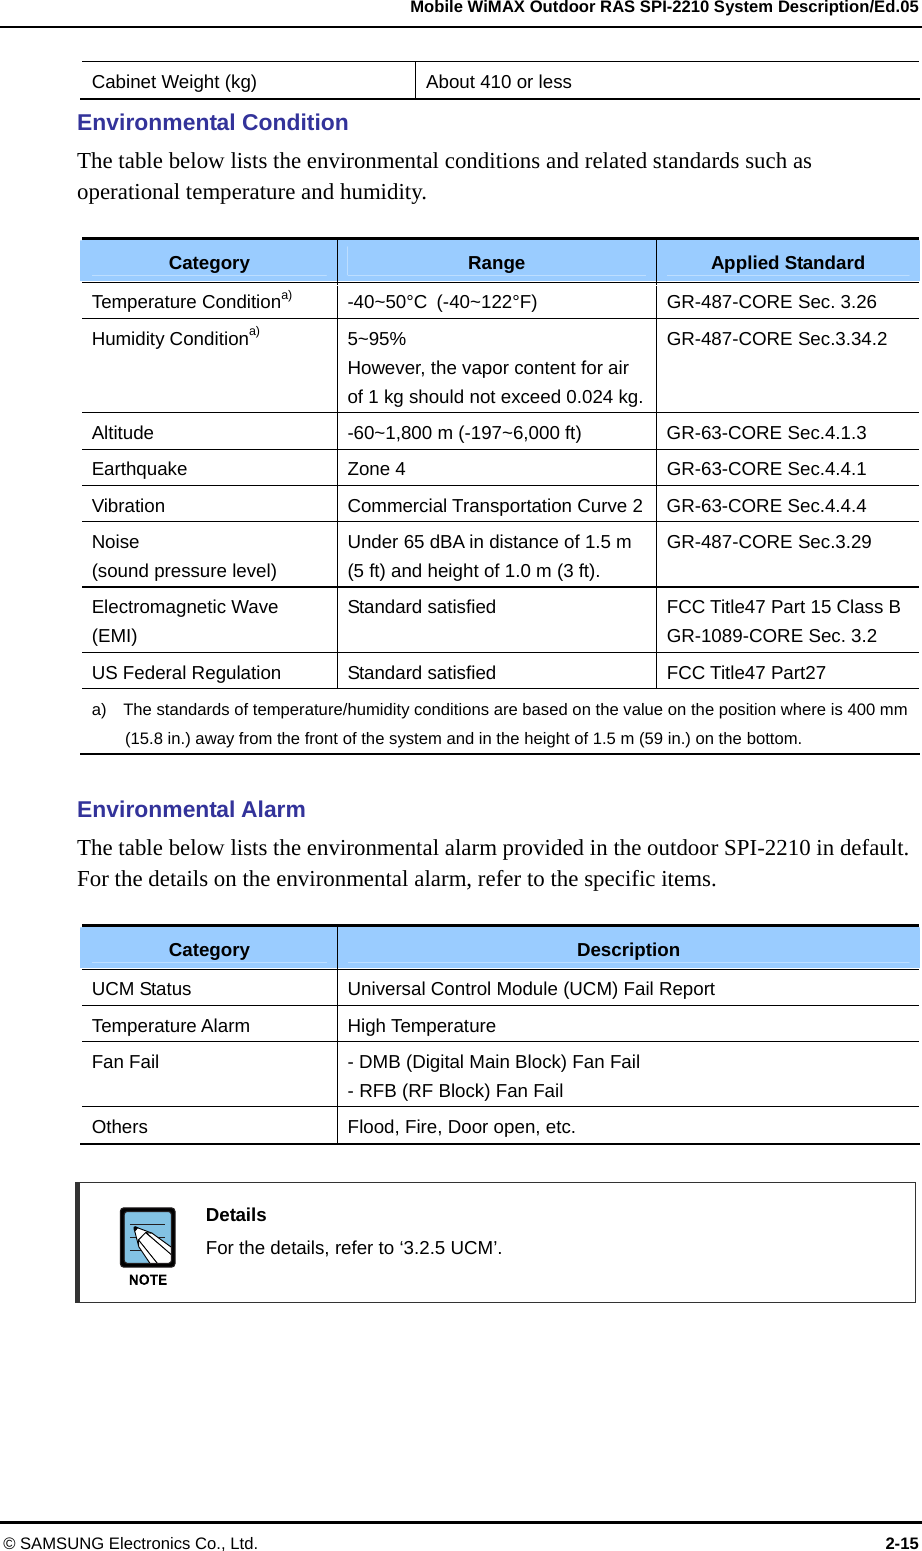   Mobile WiMAX Outdoor RAS SPI-2210 System Description/Ed.05 © SAMSUNG Electronics Co., Ltd.  2-15 Cabinet Weight (kg) About 410 or less Environmental Condition The table below lists the environmental conditions and related standards such as operational temperature and humidity.  Category Range Applied Standard Temperature Conditiona) -40~50°C  (-40~122°F)  GR-487-CORE Sec. 3.26 Humidity Conditiona) 5~95% However, the vapor content for air of 1 kg should not exceed 0.024 kg.GR-487-CORE Sec.3.34.2 Altitude -60~1,800 m (-197~6,000 ft) GR-63-CORE Sec.4.1.3 Earthquake Zone 4  GR-63-CORE Sec.4.4.1 Vibration Commercial Transportation Curve 2 GR-63-CORE Sec.4.4.4 Noise (sound pressure level) Under 65 dBA in distance of 1.5 m (5 ft) and height of 1.0 m (3 ft).   GR-487-CORE Sec.3.29 Electromagnetic Wave (EMI) Standard satisfied  FCC Title47 Part 15 Class B GR-1089-CORE Sec. 3.2 US Federal Regulation  Standard satisfied  FCC Title47 Part27 a)    The standards of temperature/humidity conditions are based on the value on the position where is 400 mm (15.8 in.) away from the front of the system and in the height of 1.5 m (59 in.) on the bottom.  Environmental Alarm The table below lists the environmental alarm provided in the outdoor SPI-2210 in default. For the details on the environmental alarm, refer to the specific items.  Category Description UCM Status  Universal Control Module (UCM) Fail Report Temperature Alarm  High Temperature Fan Fail  - DMB (Digital Main Block) Fan Fail - RFB (RF Block) Fan Fail Others  Flood, Fire, Door open, etc.   Details   For the details, refer to ‘3.2.5 UCM’.  